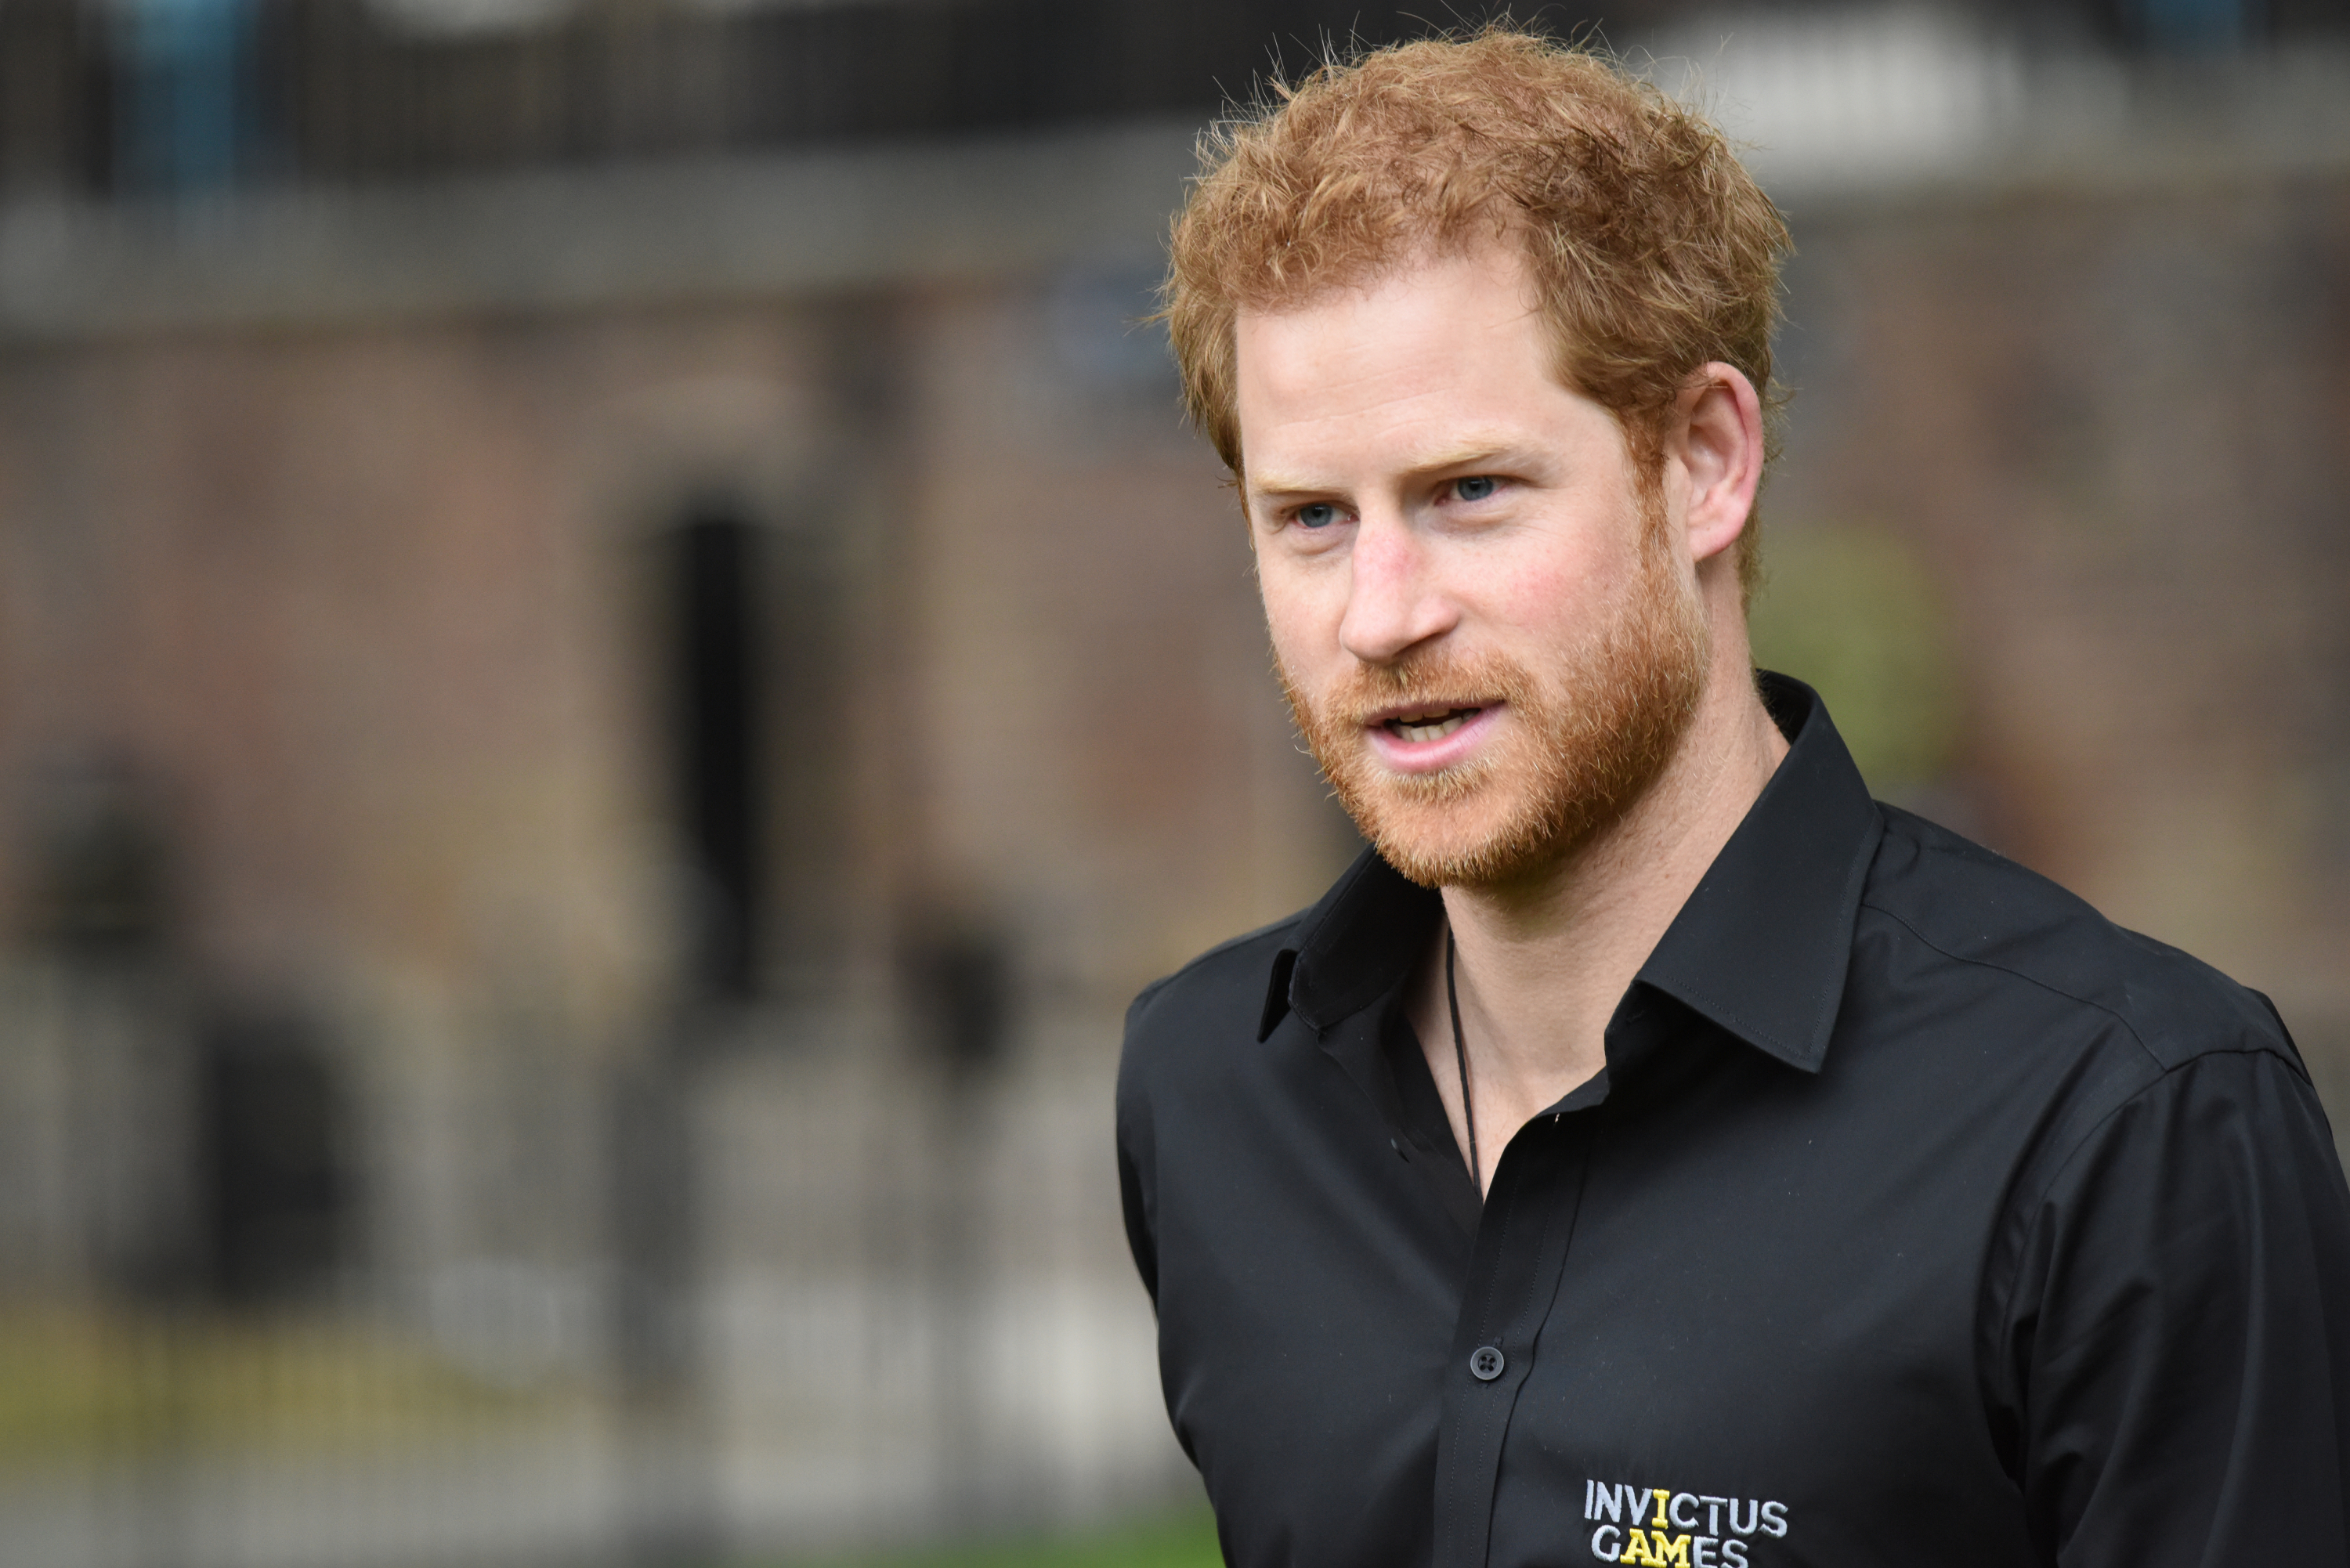 Prince Harry, pictured in London in 2017.